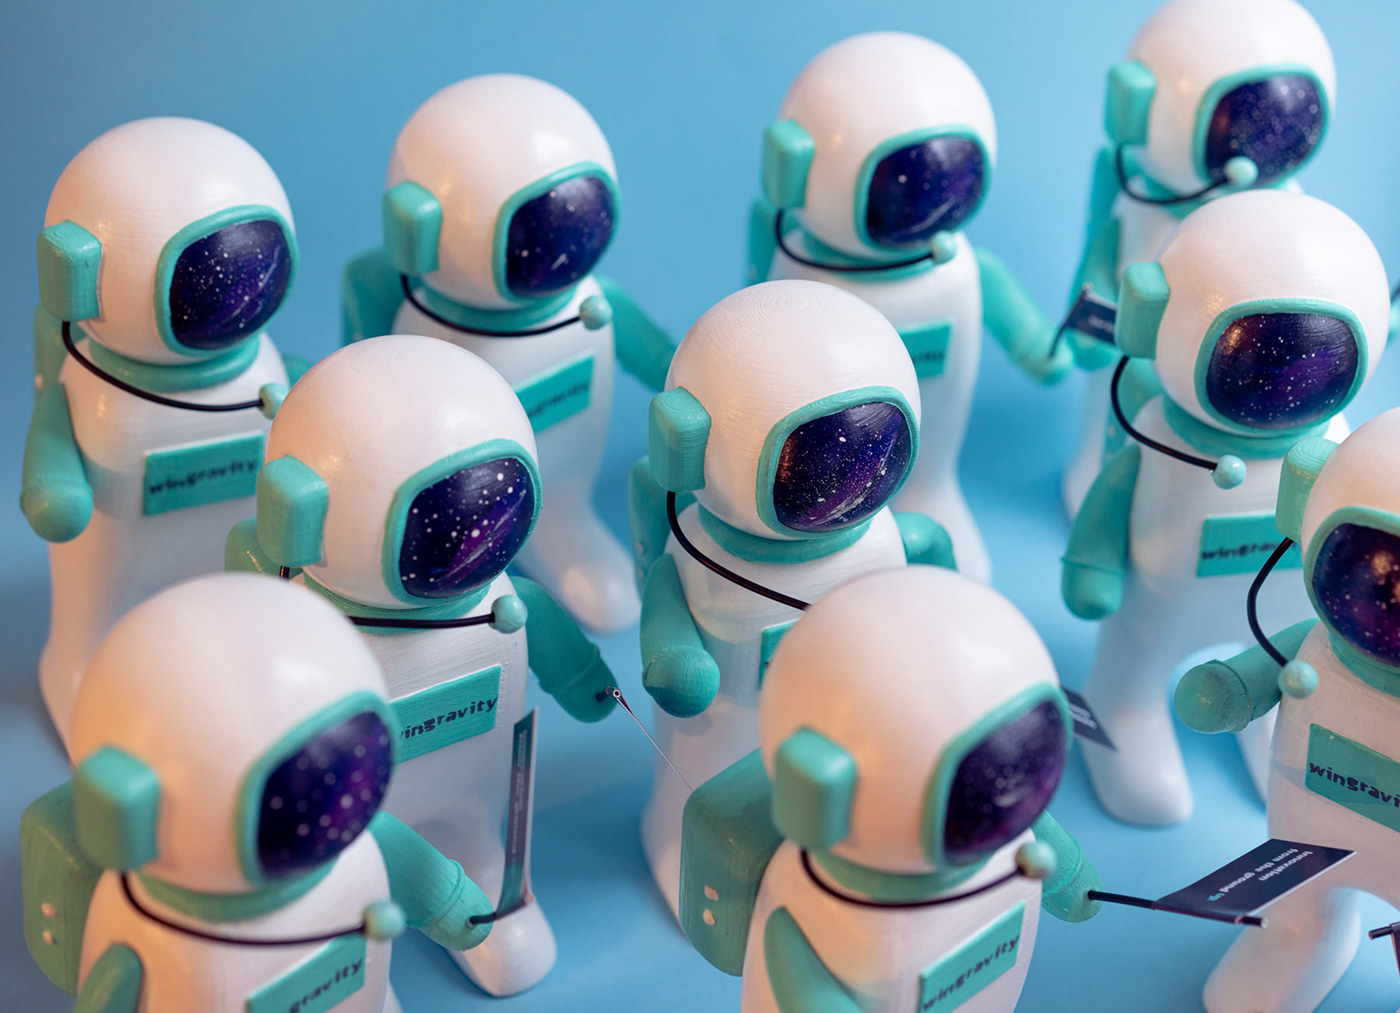 3d modeling 3d print 3d printing astronaut avatar Character Mascot product design  prototype constellation